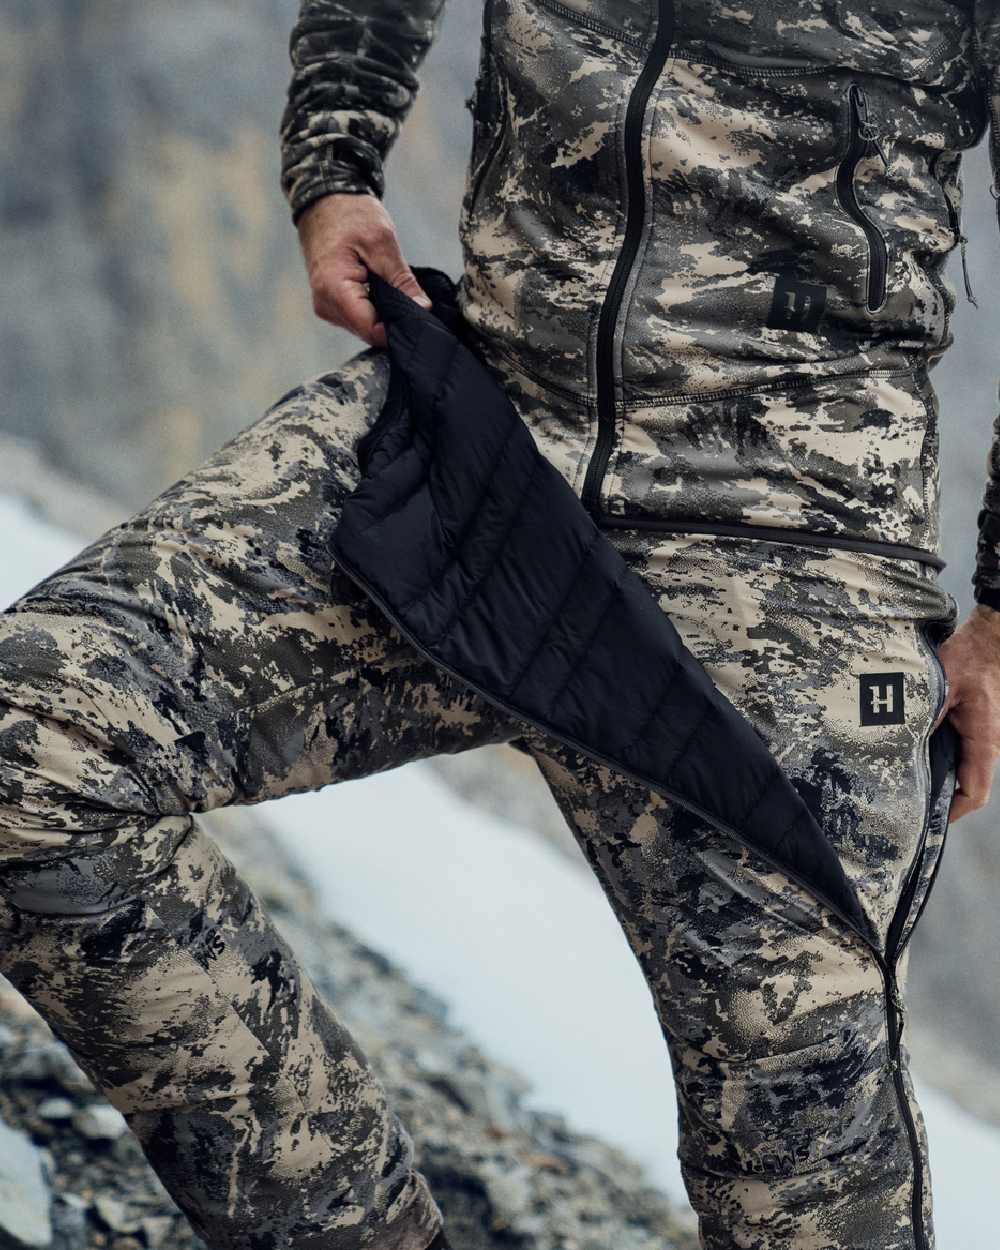 AXIS Forest coloured Harkila Mountain Hunter Expedition Packable Down Trousers worn by hunter in mountains